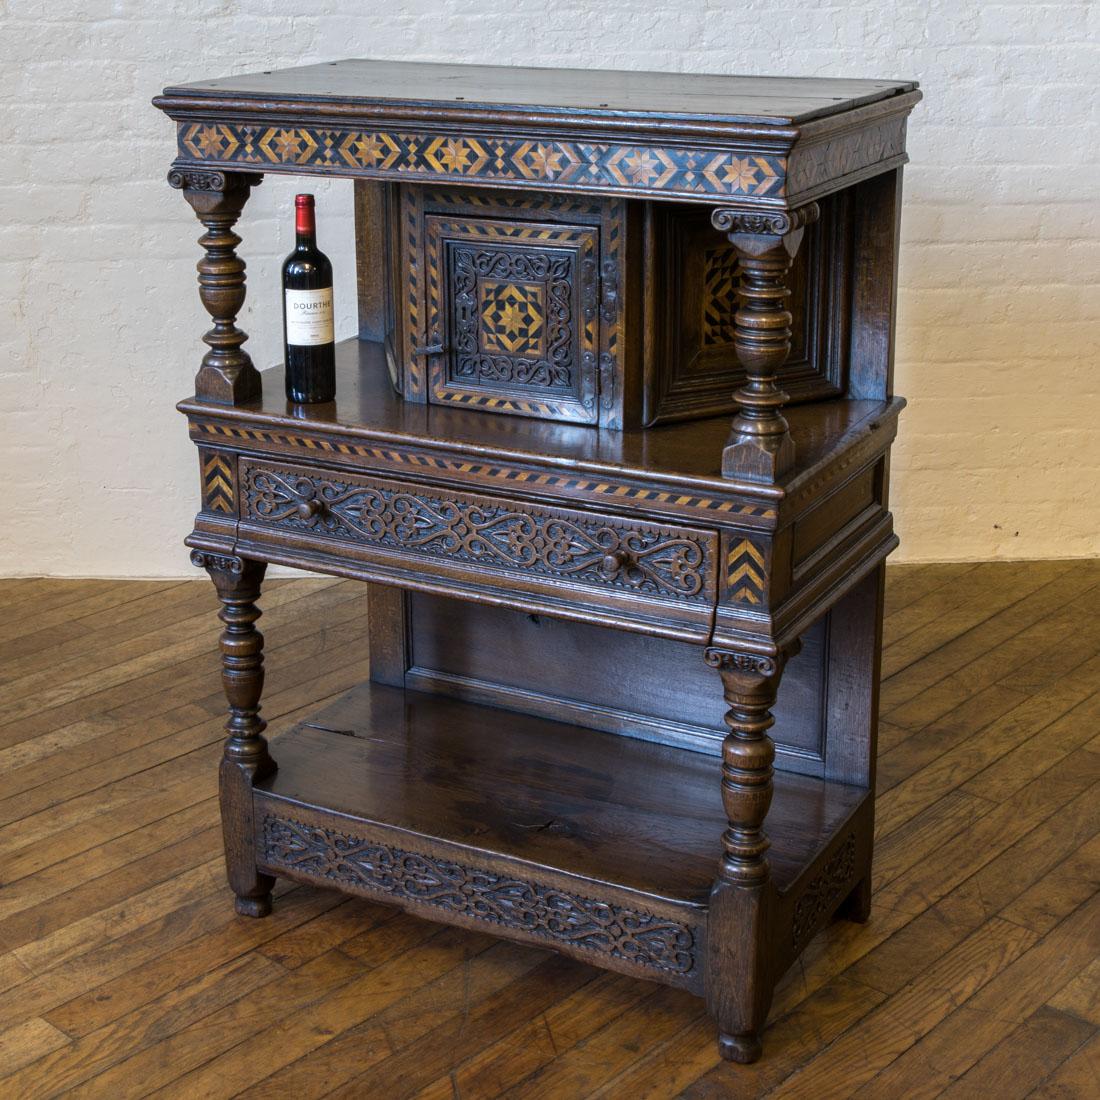 A small and very attractive solid oak court cupboard set throughout with carved and geometric inlaid detail made in the late Victorian period as a copy of a mid-17th century design. With odd marks and splits as you could expect, but in generally